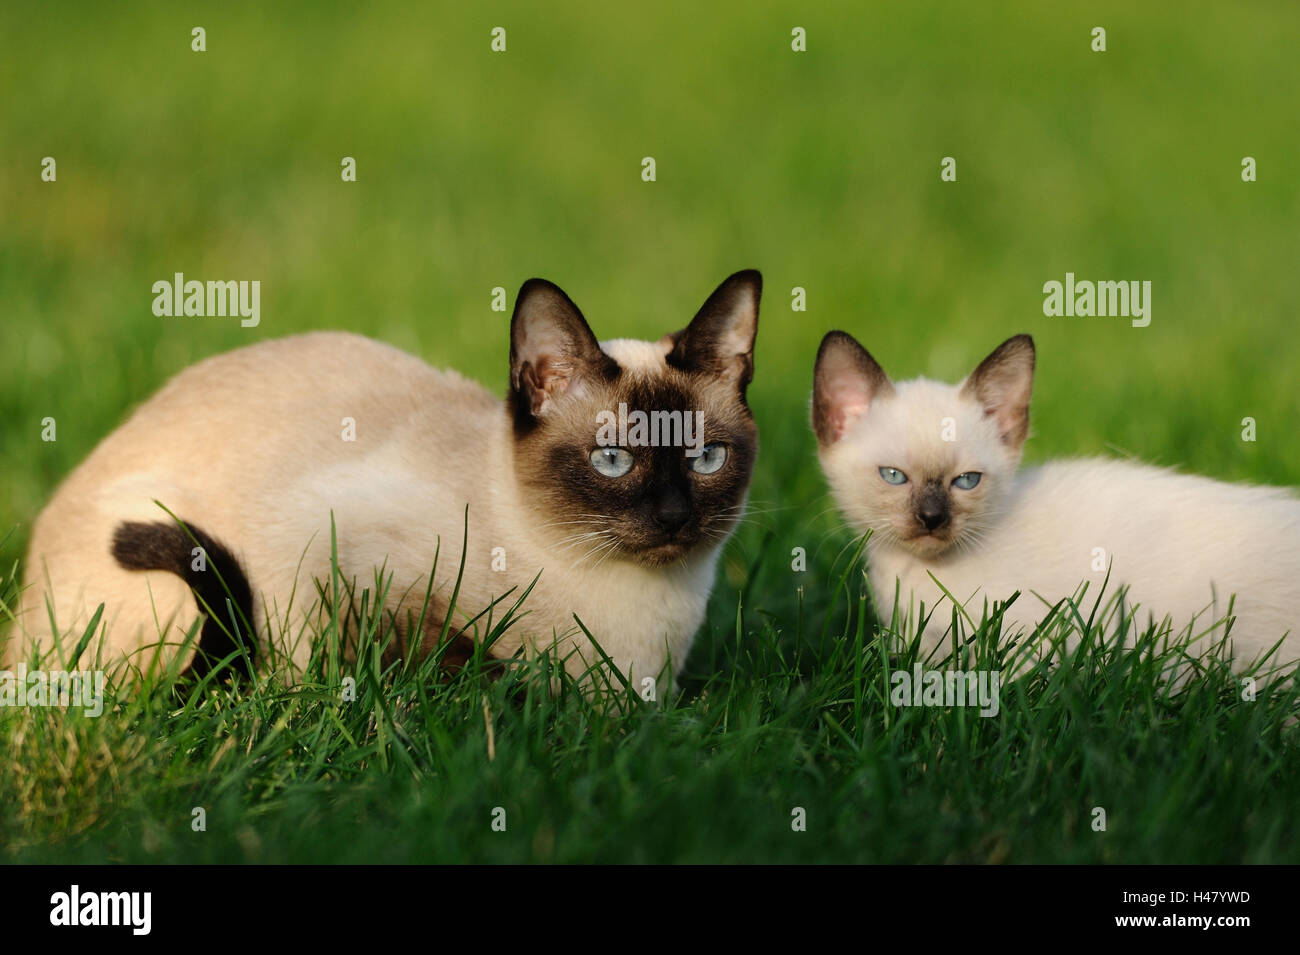 Siamese Seal Point cats, mother animal with young animal, meadow, lying, looking at camera, Stock Photo